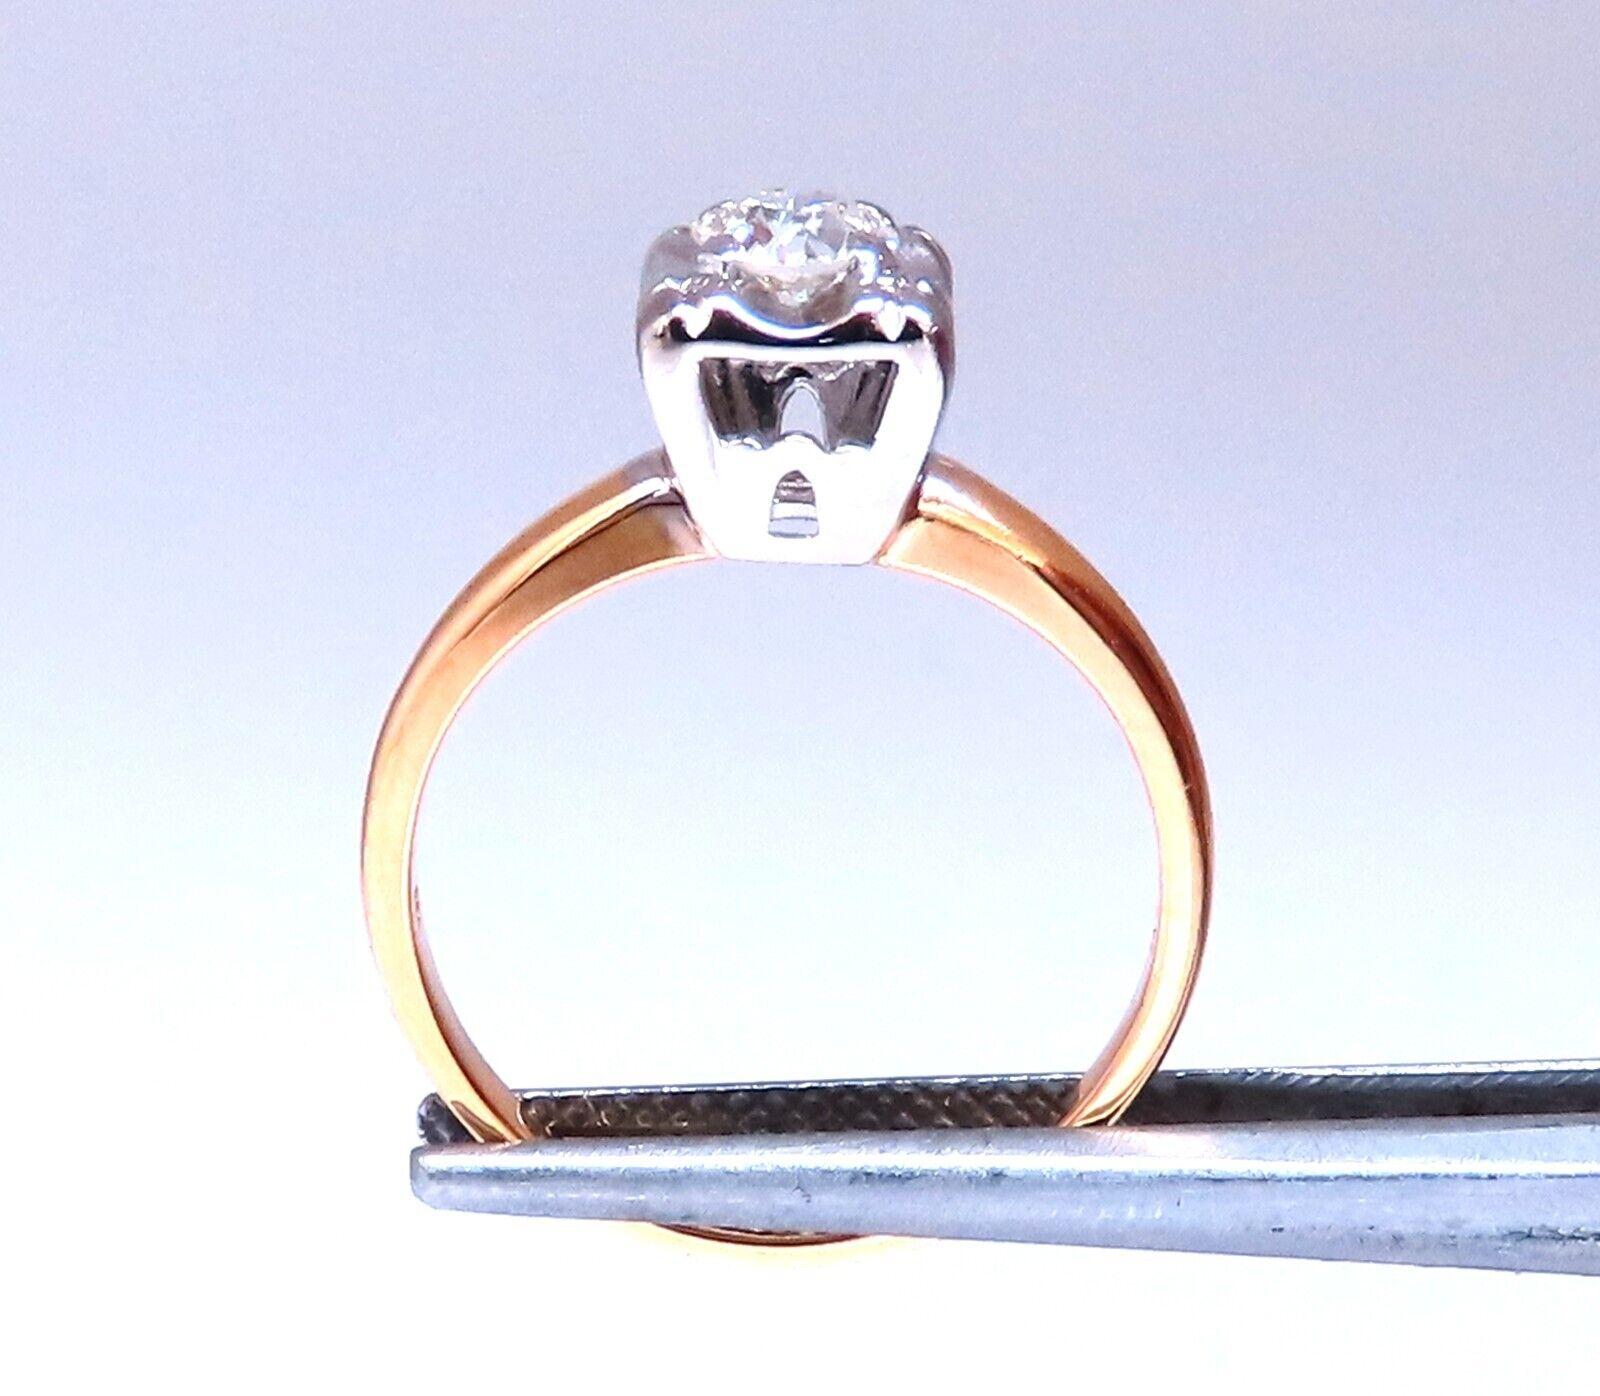 .30ct Natural round Cut Diamond Ring

vs-2 clarity H color.

14kt yellow gold

2.7 Grams

Depth: 7mm

6.9mm wide

Current ring size: 6

May professionally resize, please inquire.